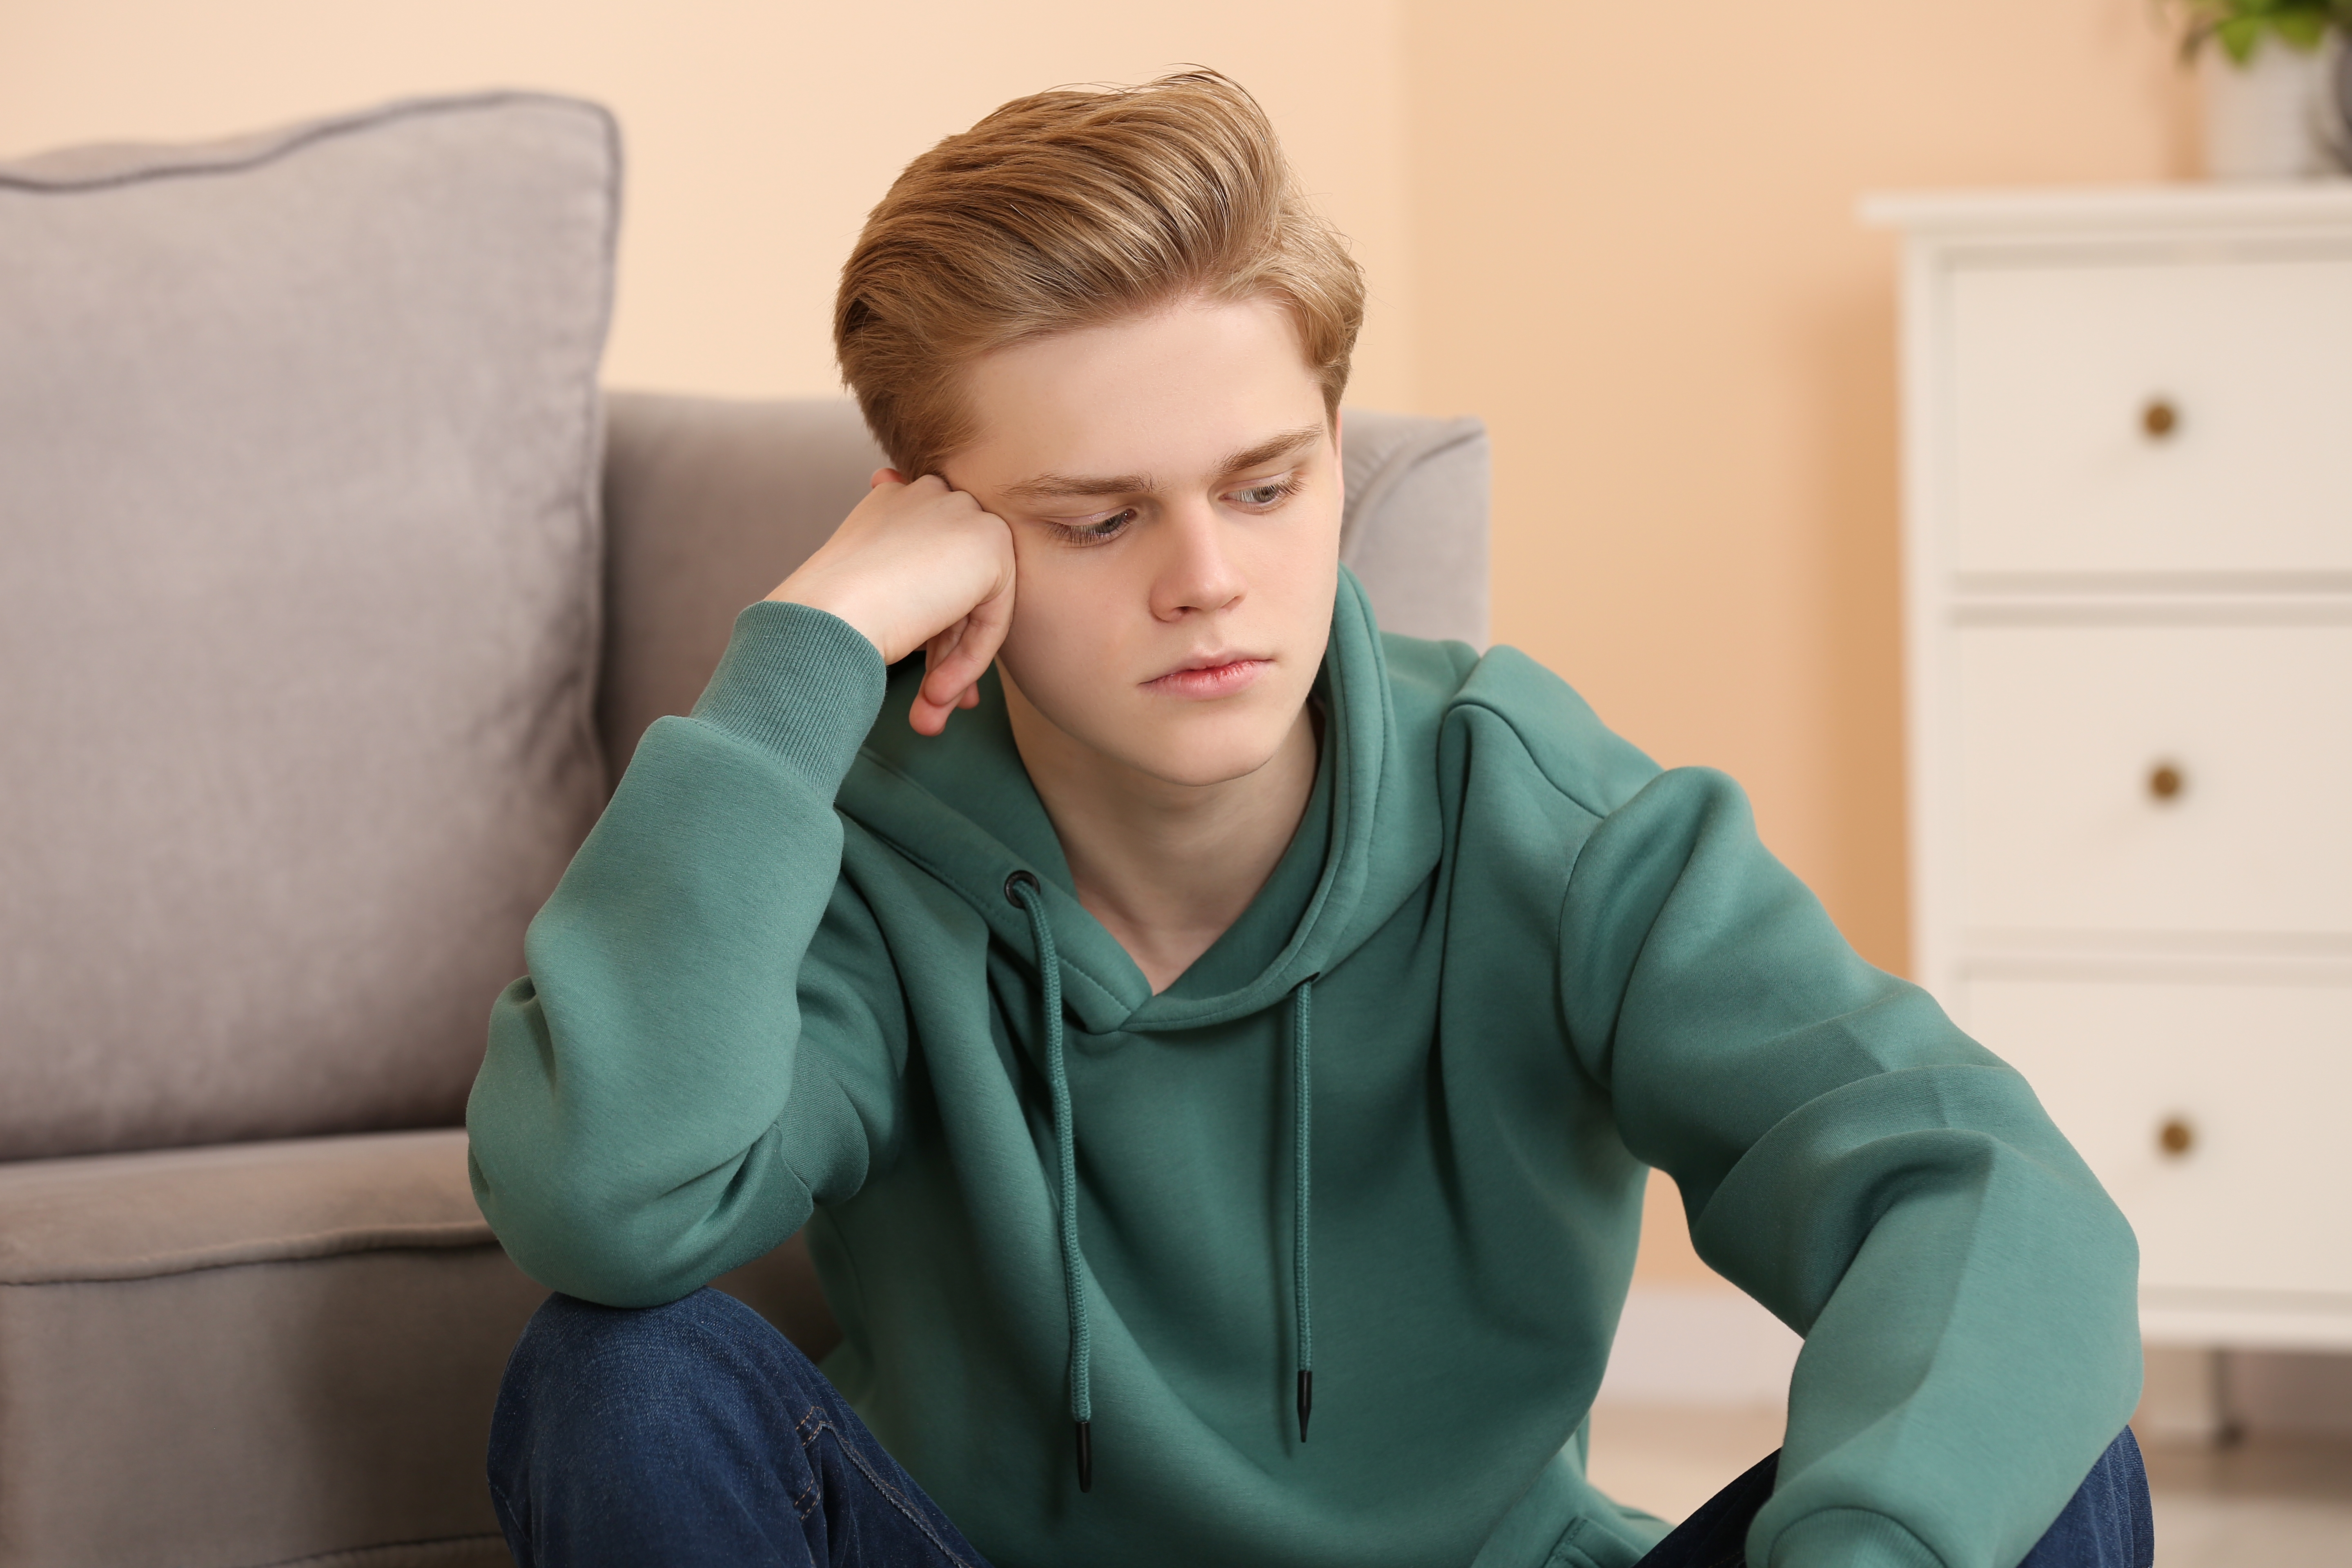 An upset teenage boy sitting alone in his room | Source: Shutterstock